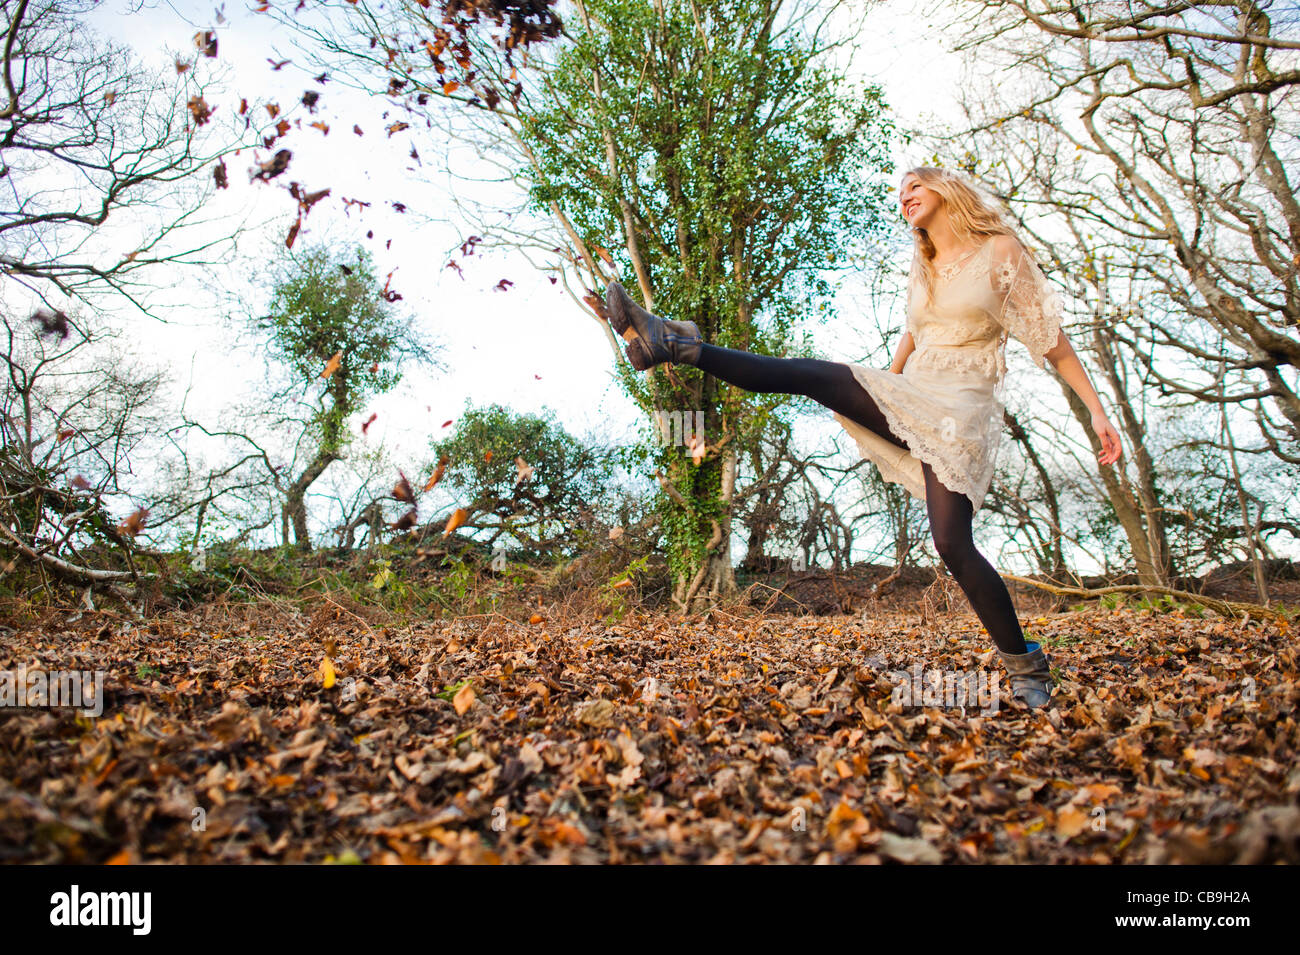 a slim blonde woman girl alone in woodland autumn afternoon daytime kicking up dry leaves, UK Stock Photo